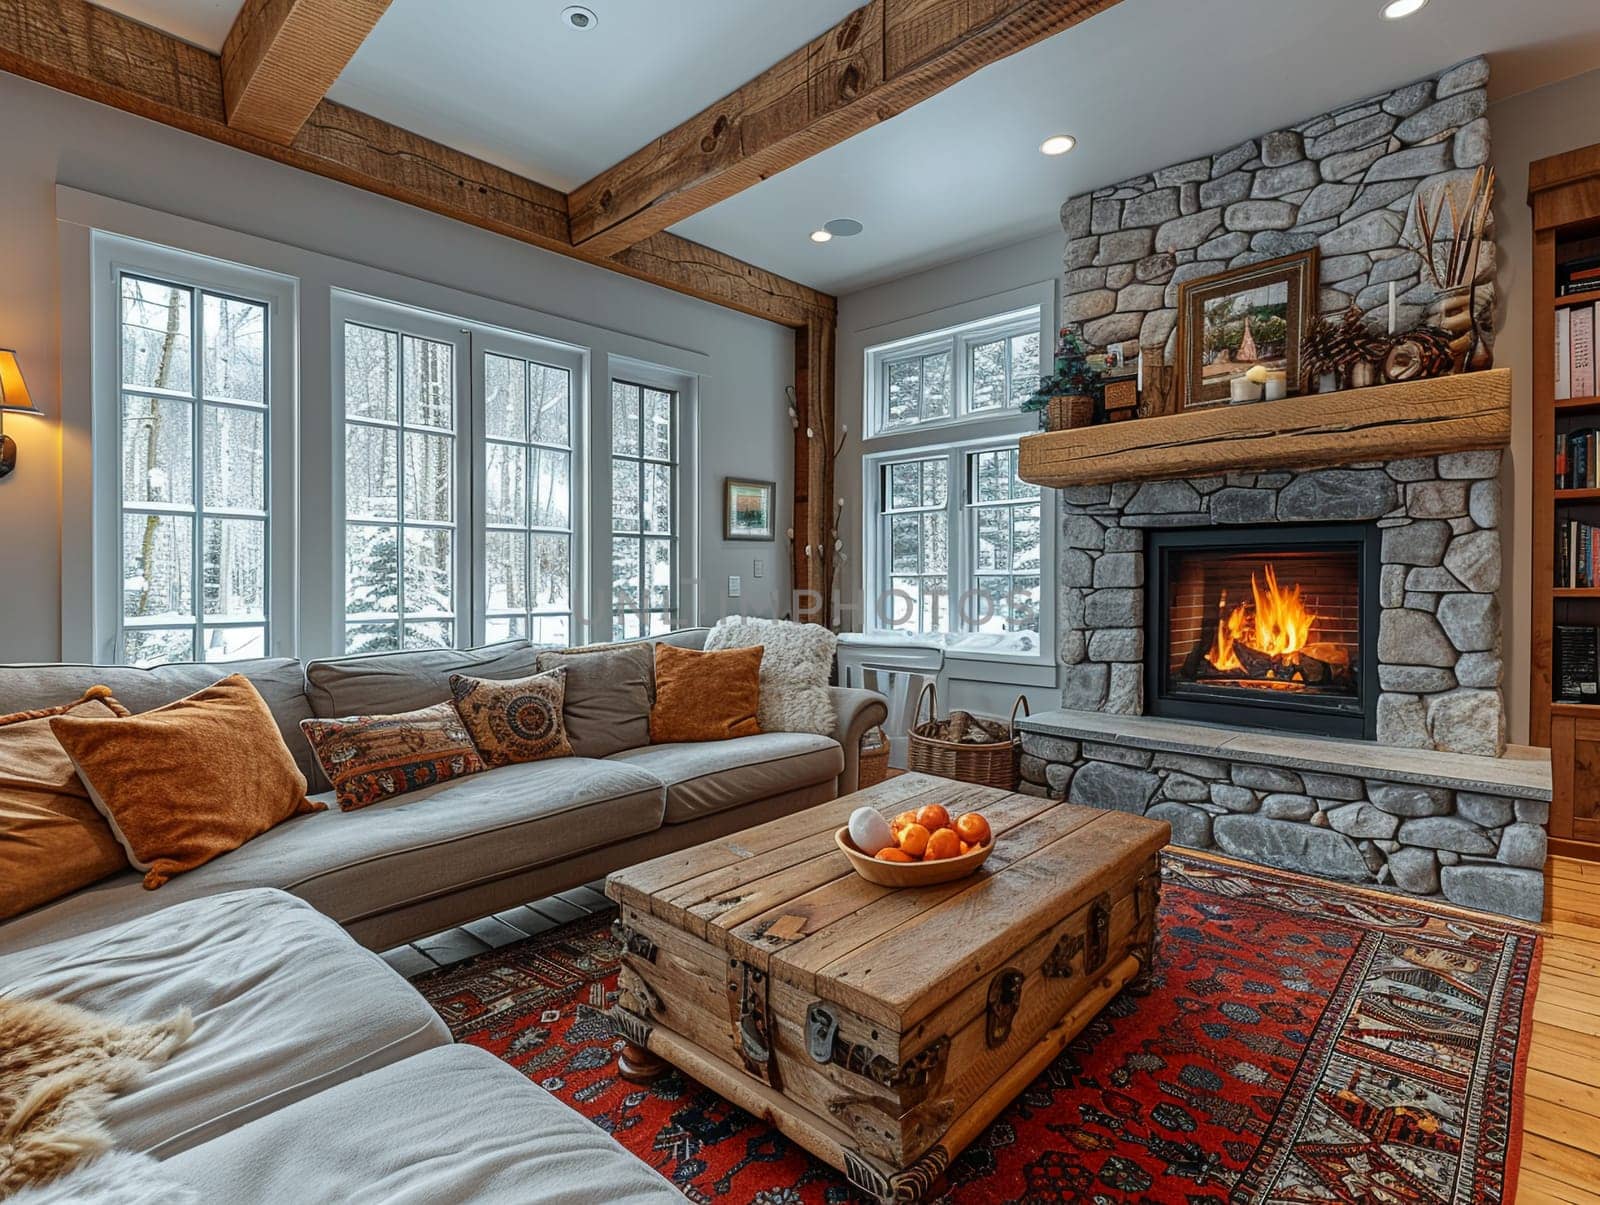 Cozy ski lodge living room with a stone fireplace and comfortable seating